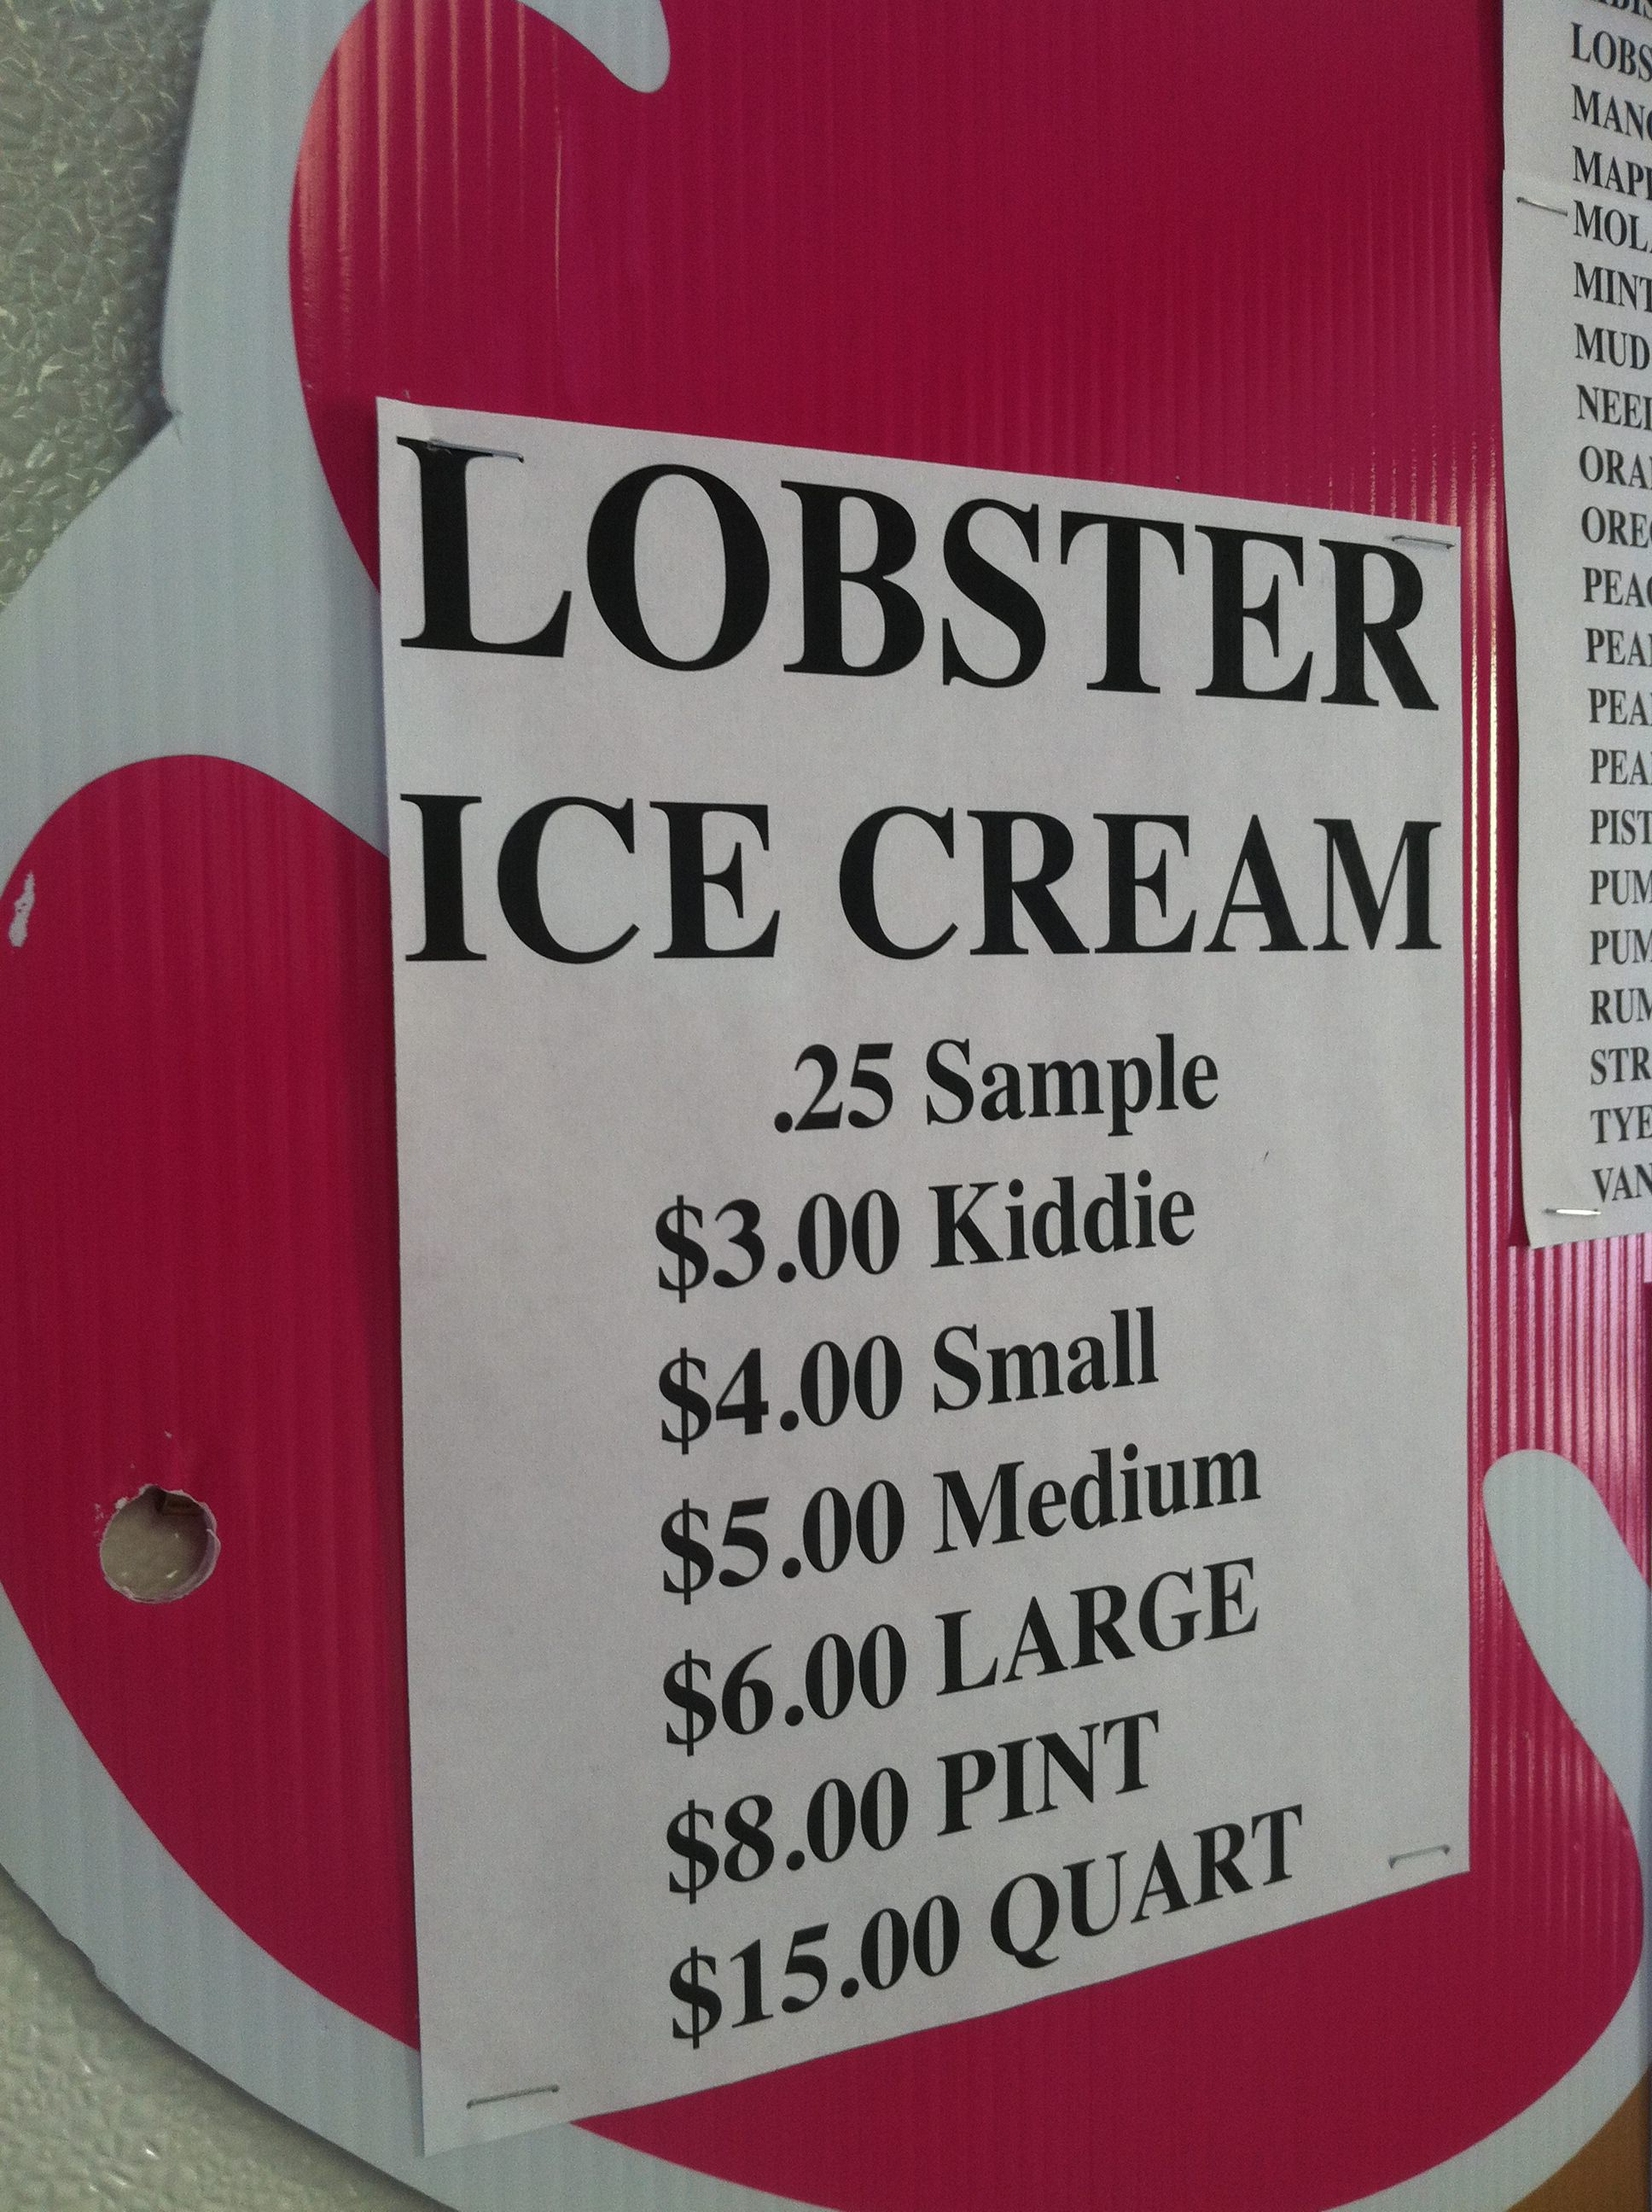 Lobster Ice Cream. No Really. Only in Maine